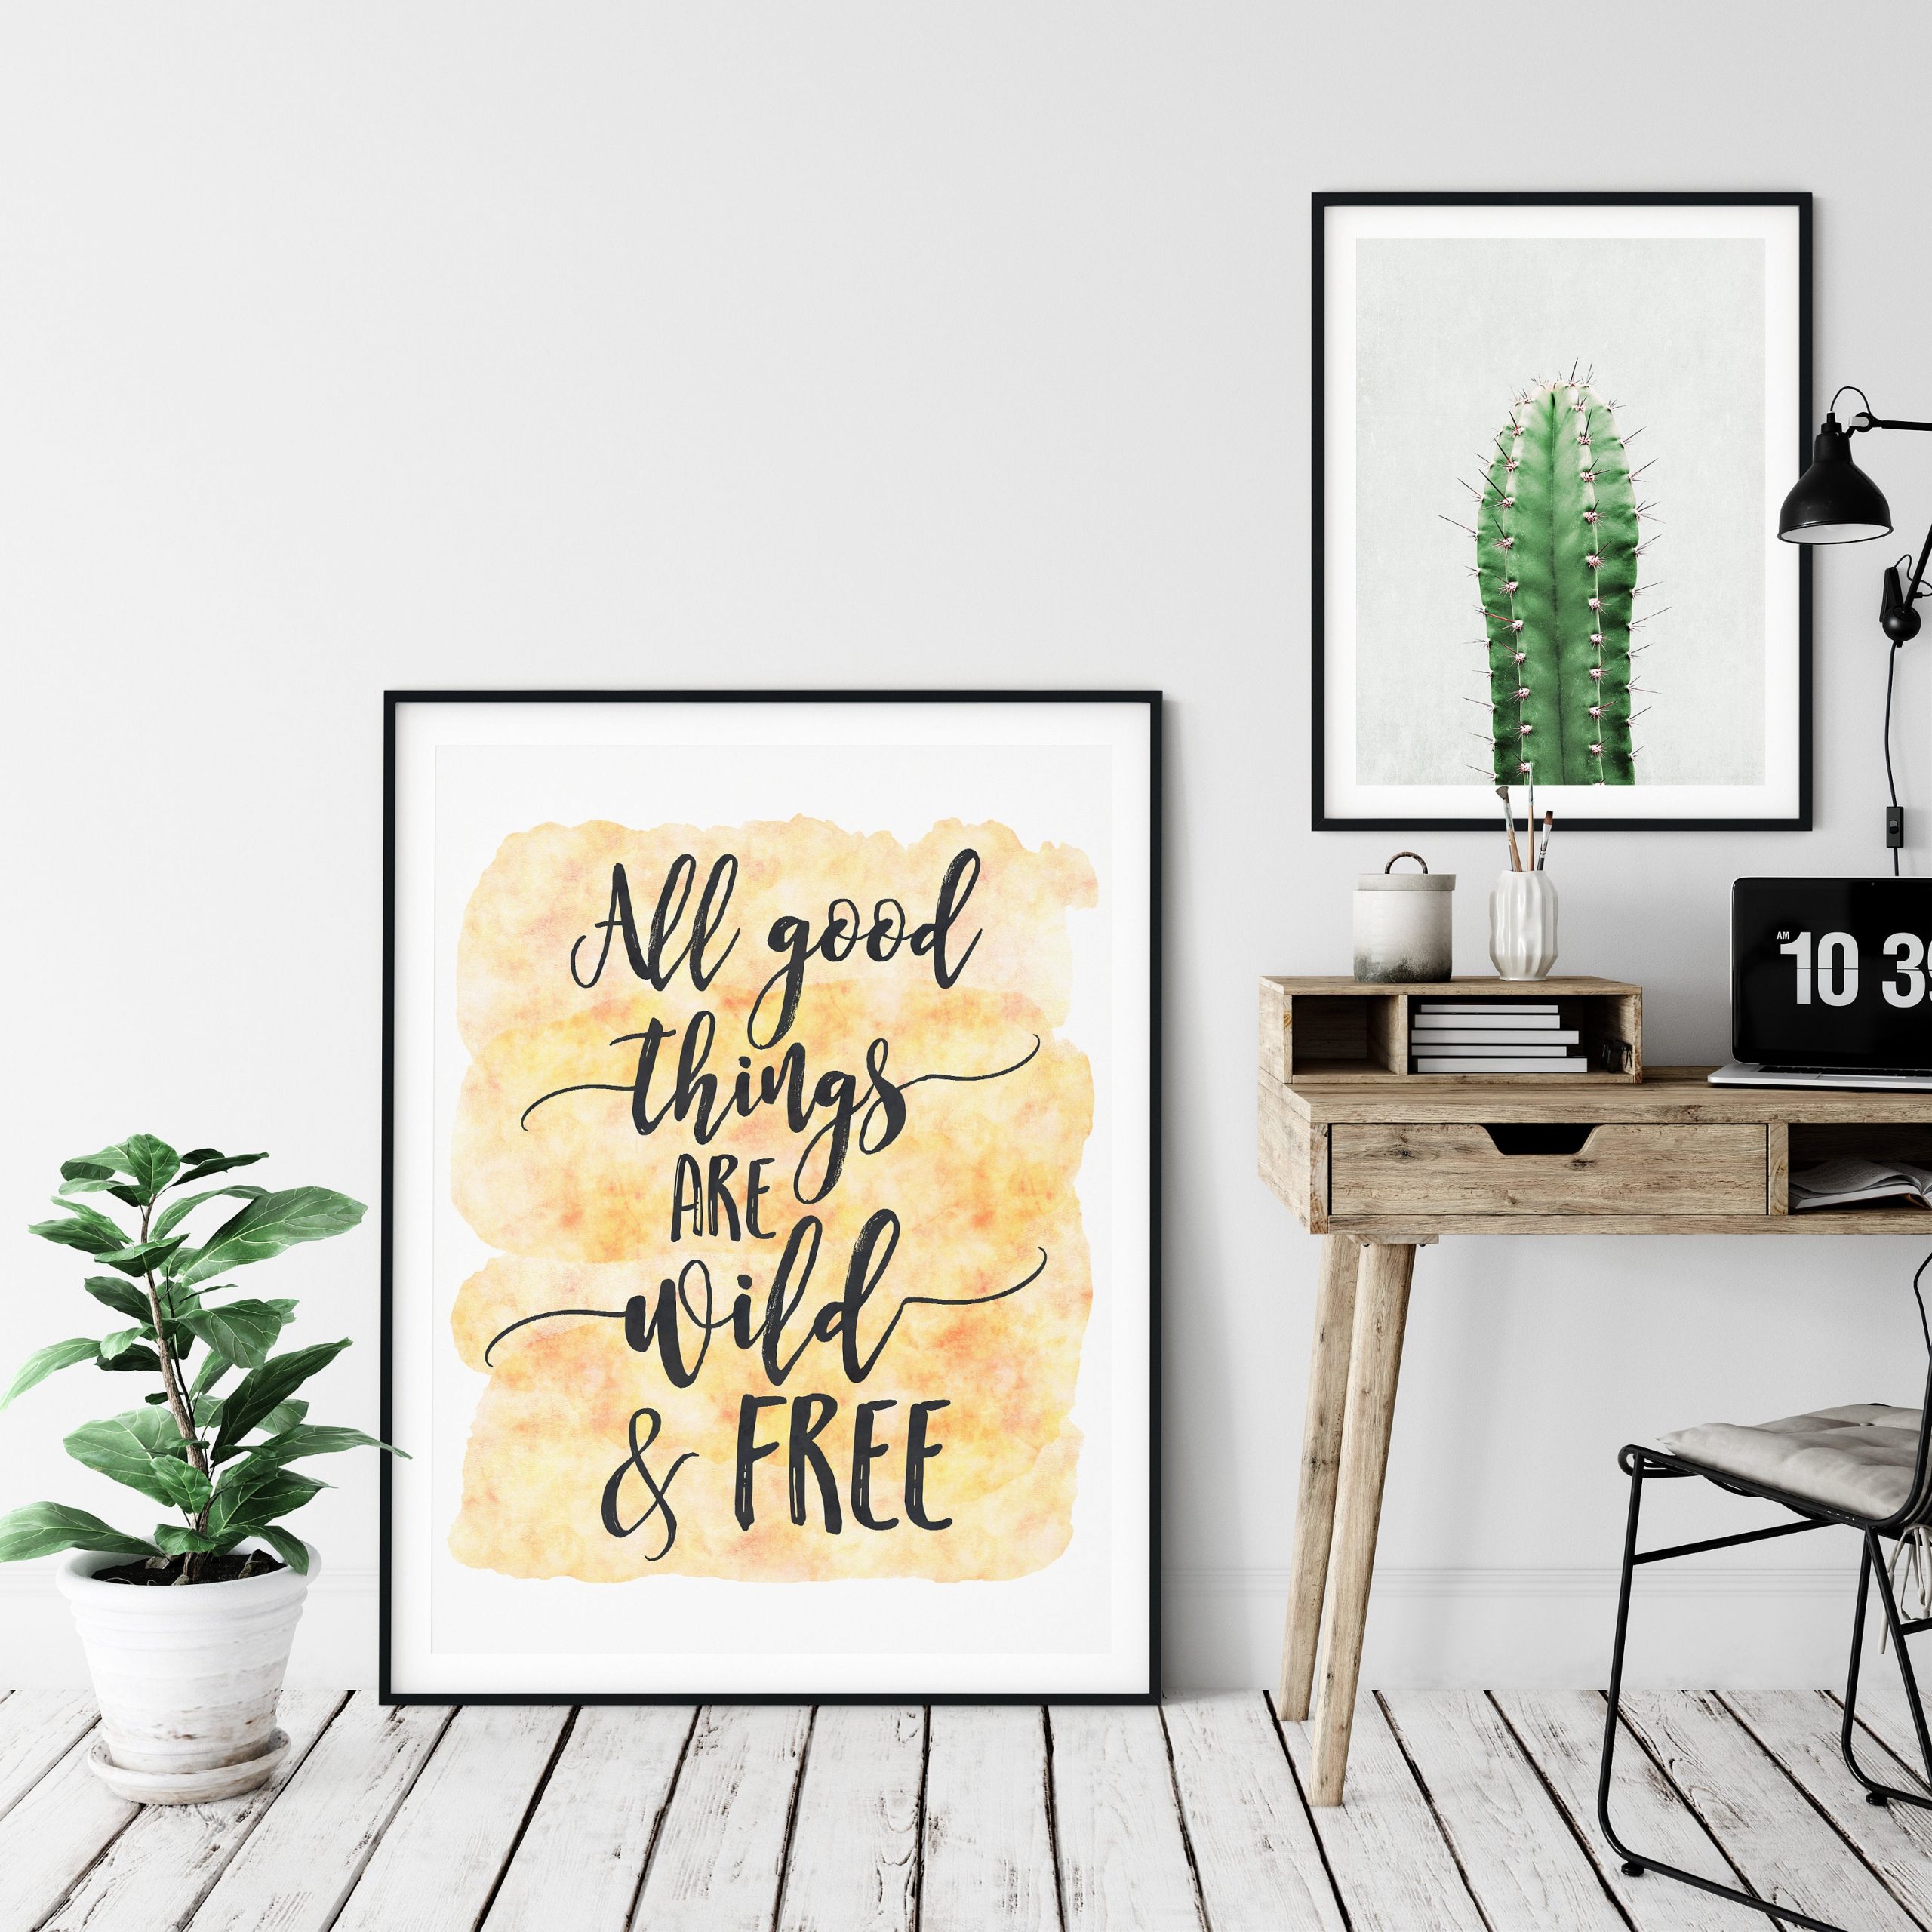 All Good Things Are Wild And Free, Nursery Print Wall Art, Inspirational Quotes